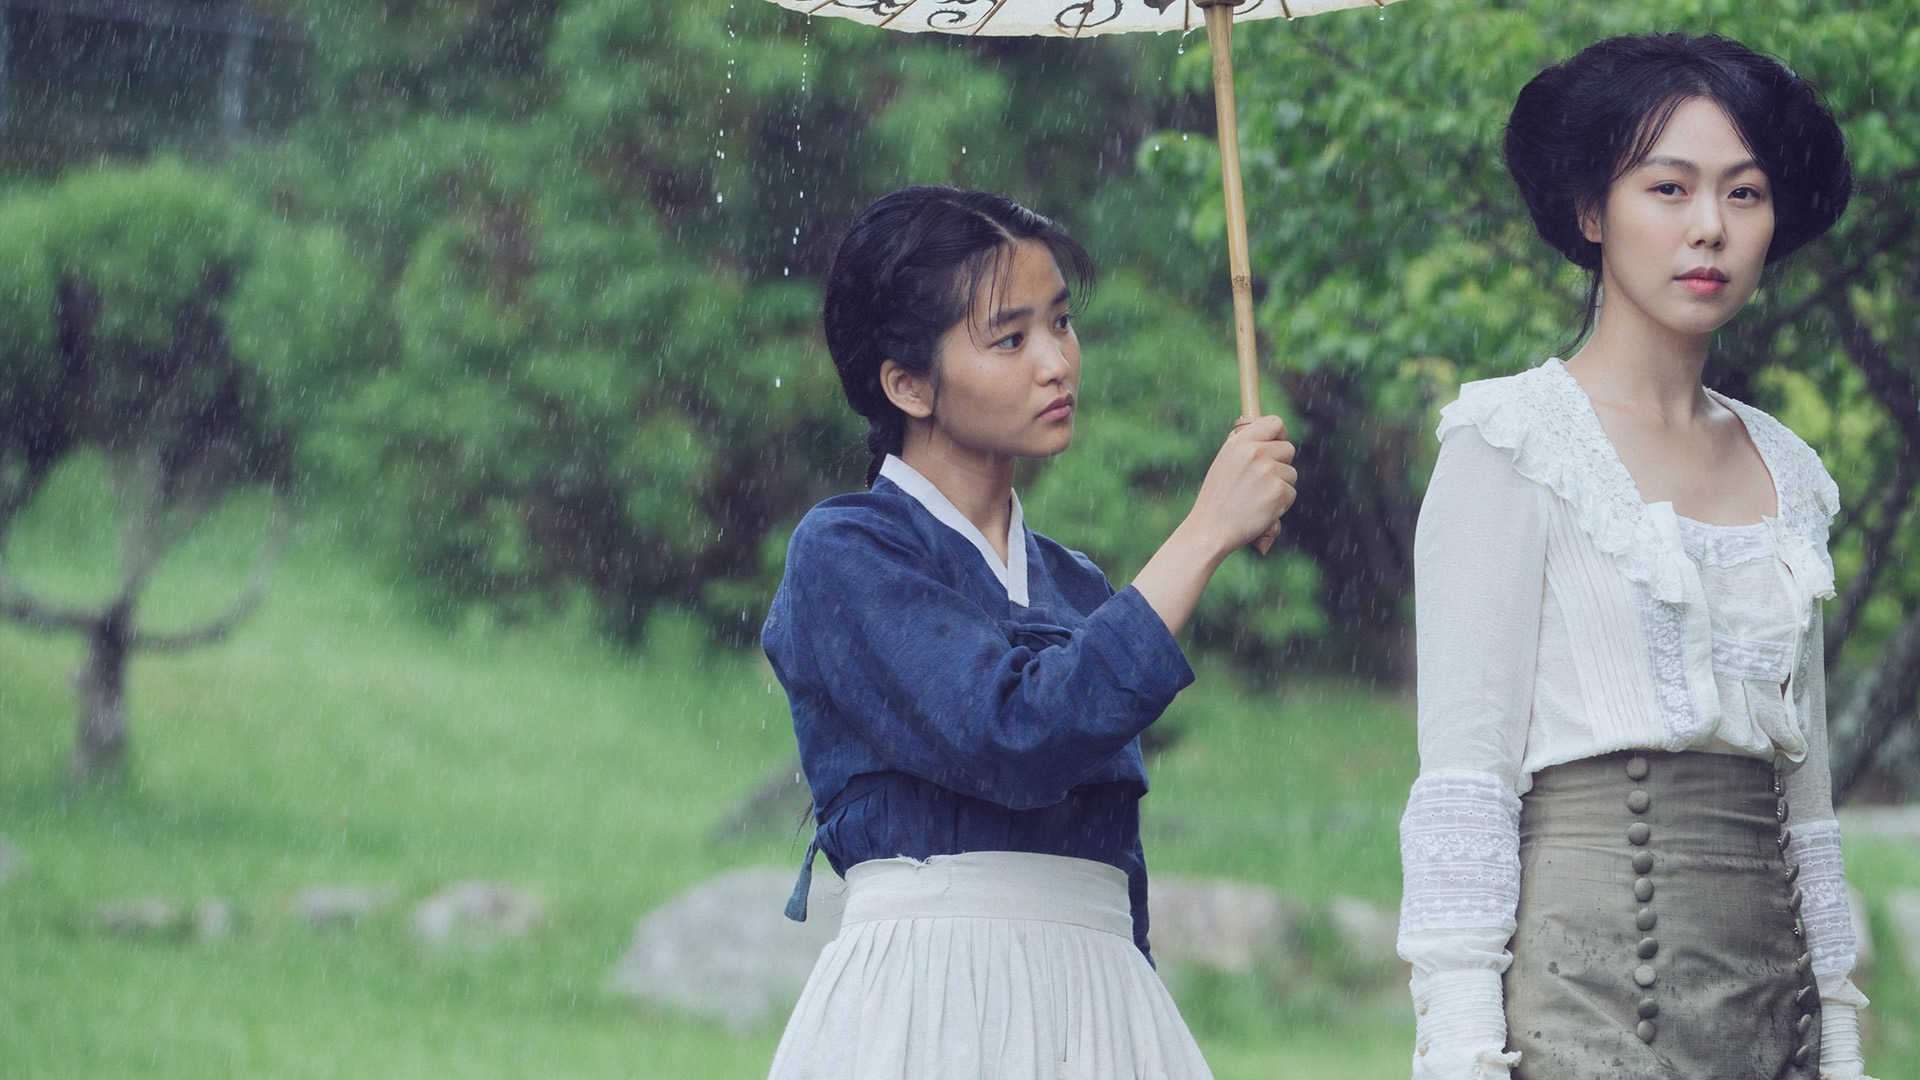 Sook-hee holds a parasol over Izumi's head.